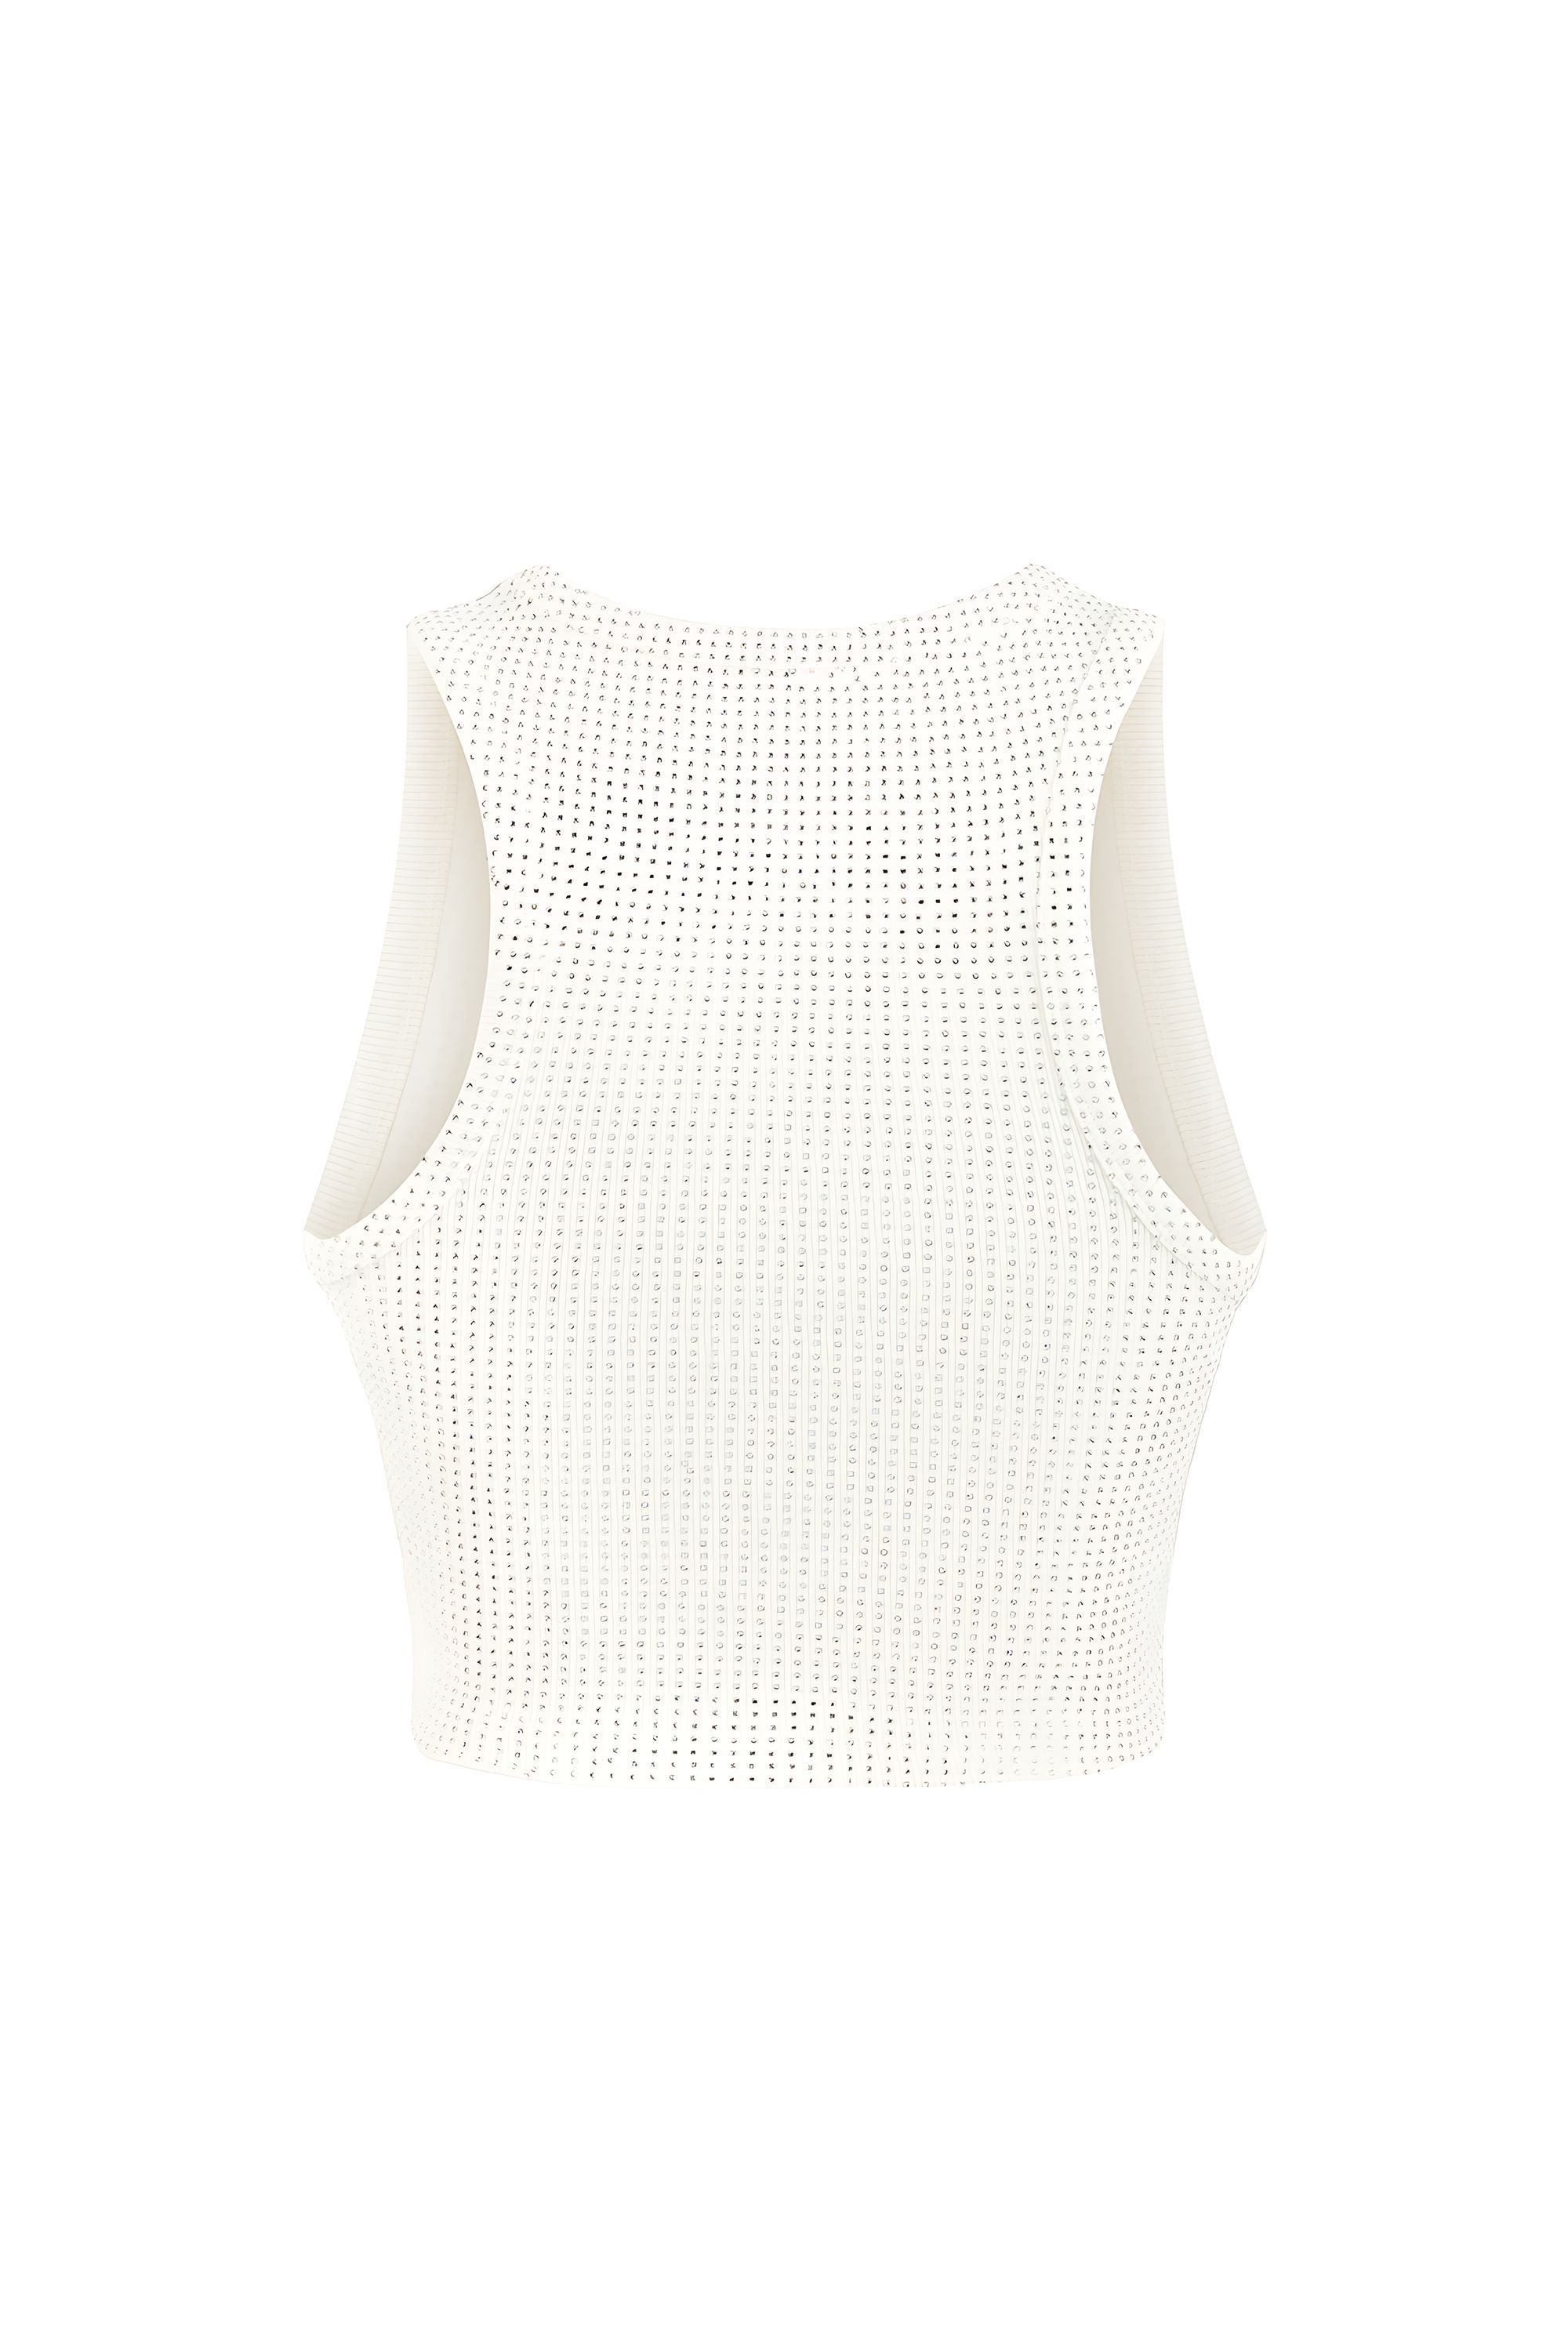 Stone Detailed Crop Top